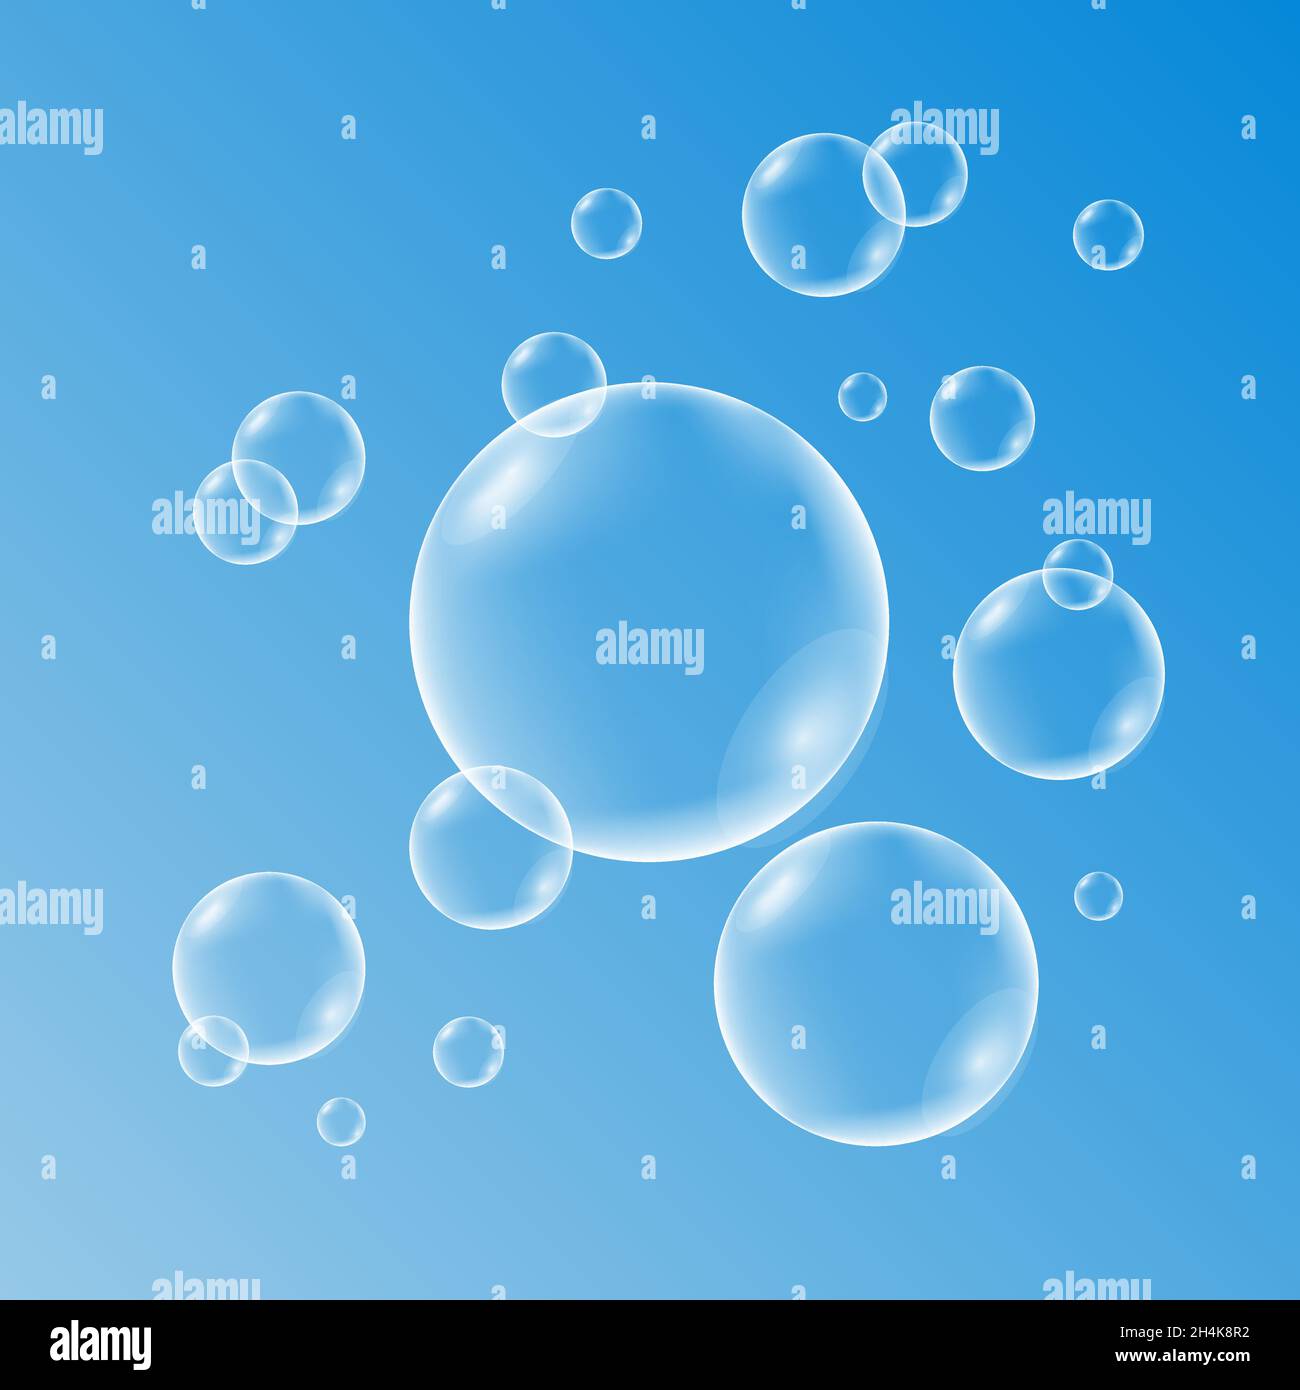 Set of clean water, soap, gas or air  bubbles with reflection on transparent background. Realistic underwater vector  illustration. Stock Vector